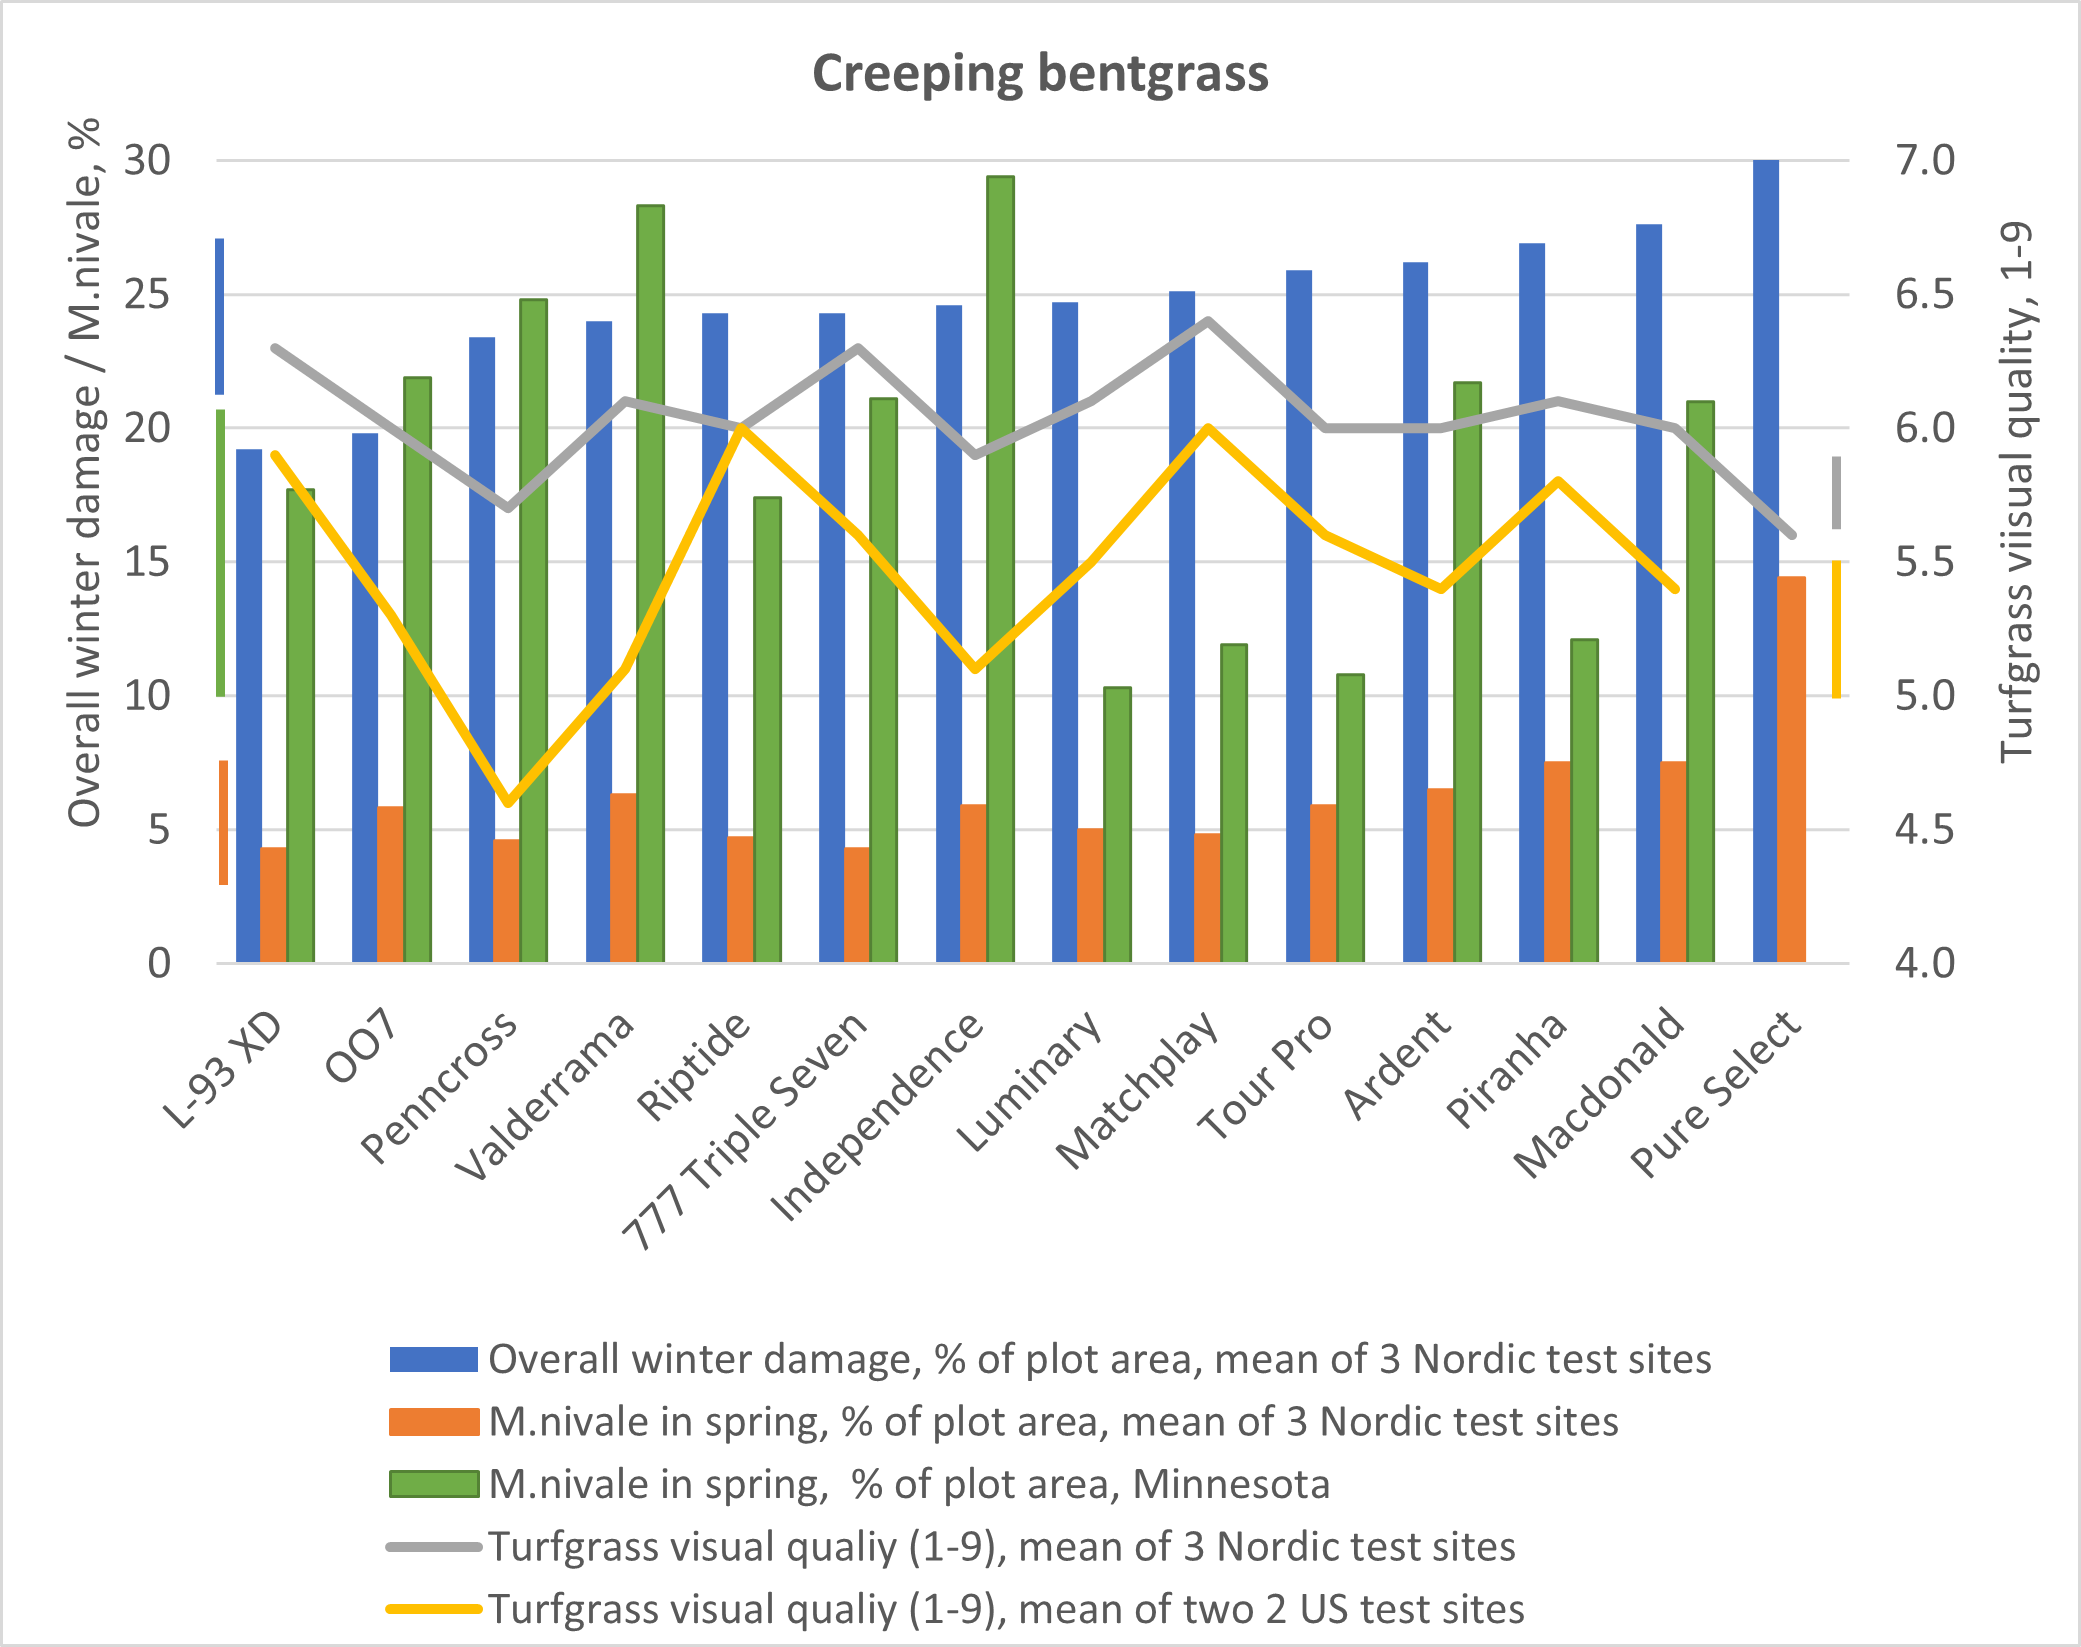 a graph with creeping bentgrass cultivars and winter damage